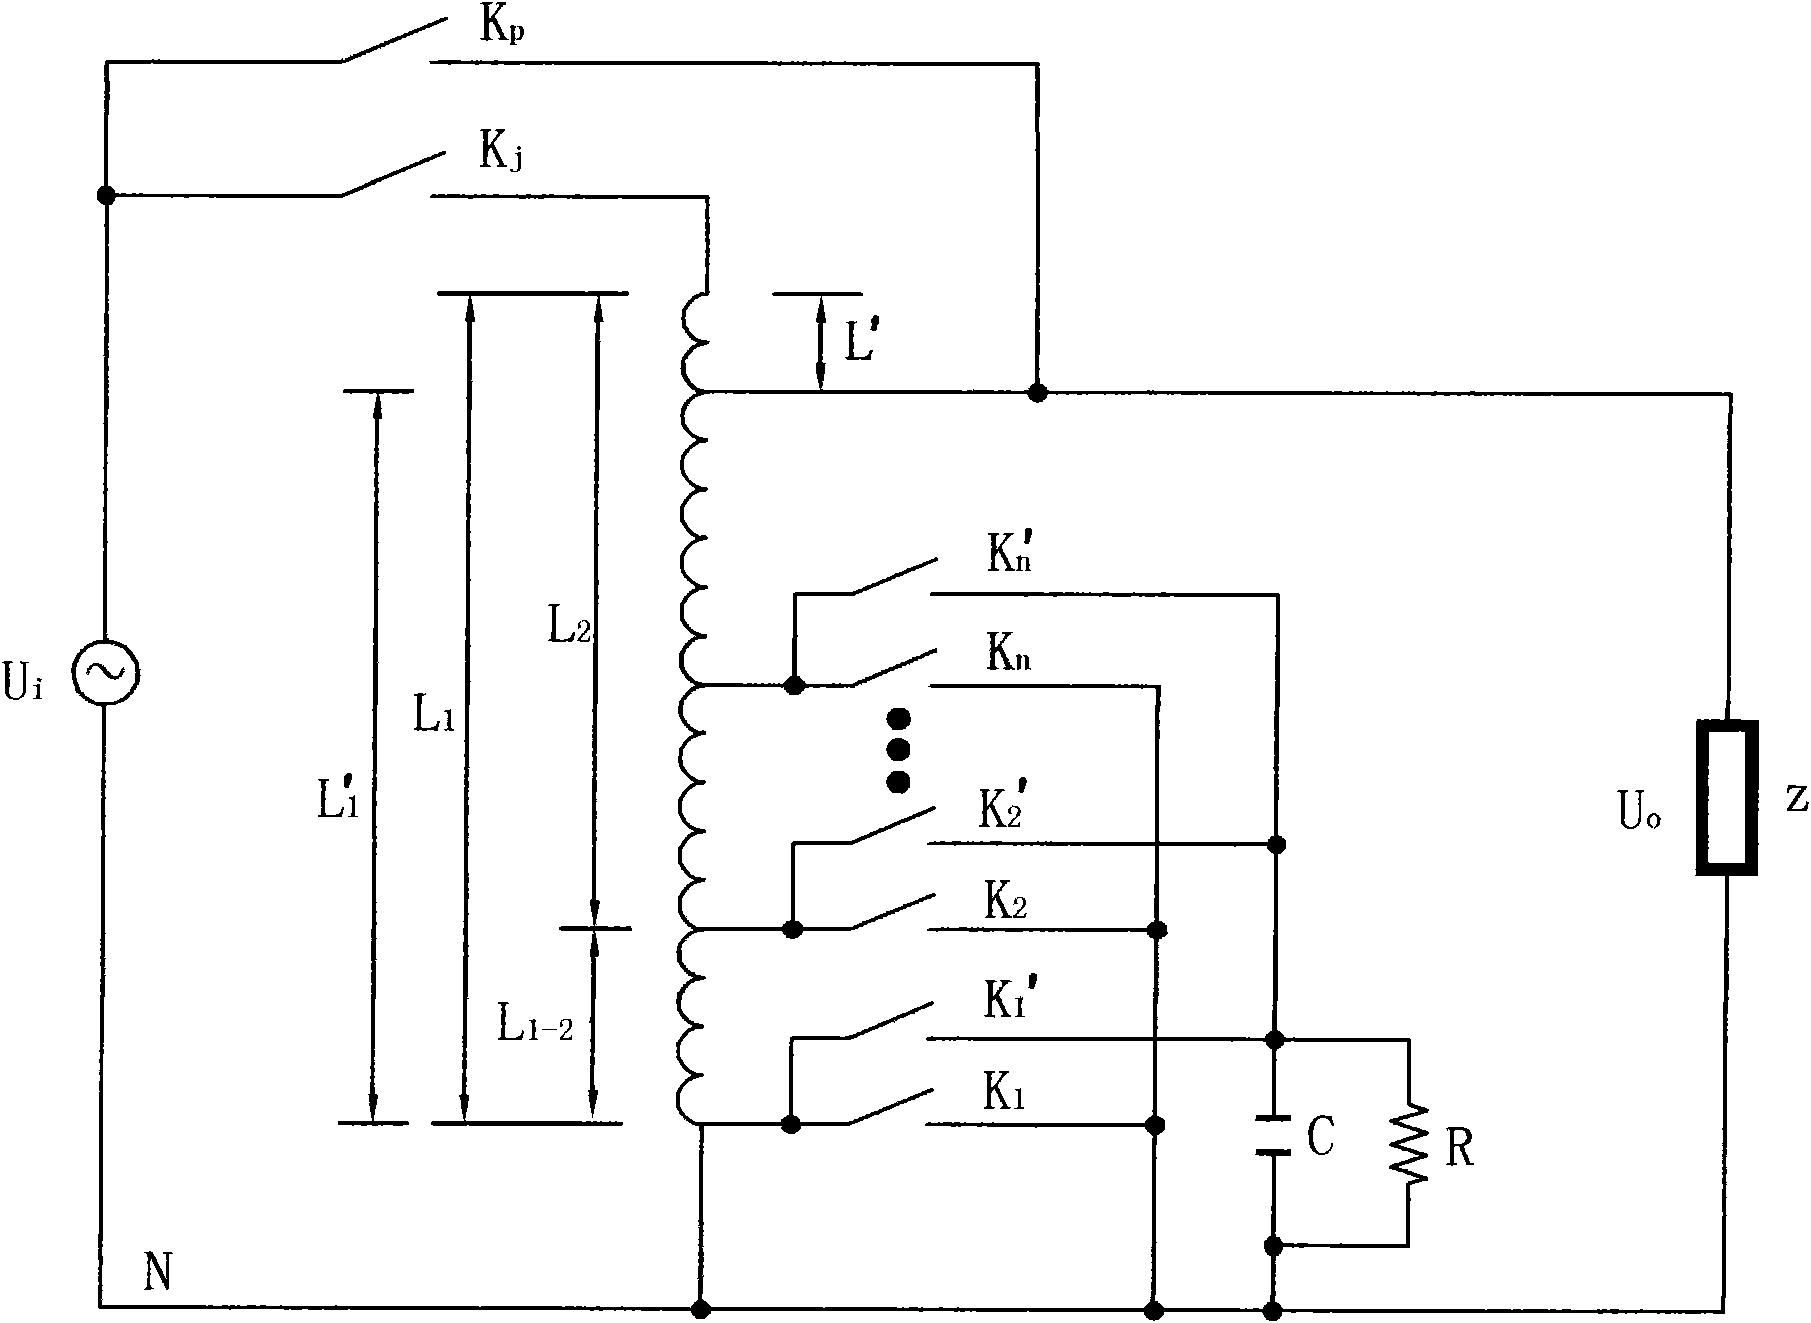 Lighting energy saving device with no flash or overvoltage on basis of logic control